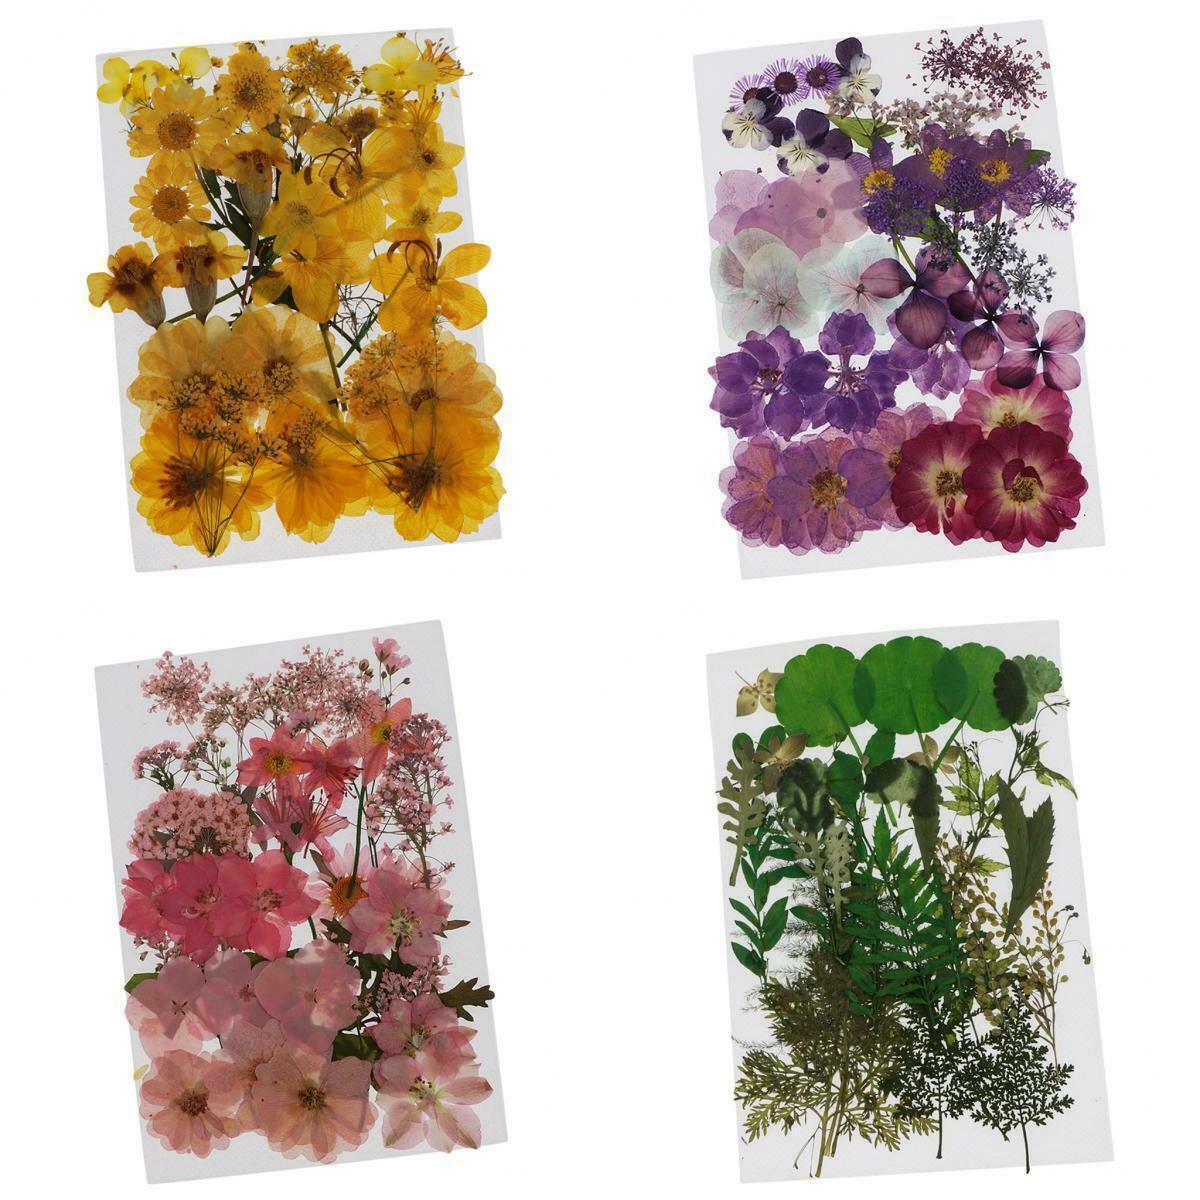 152x Real Dried Flower Leaves For UV Gel Acrylic False Nail Art Face Decor Craft